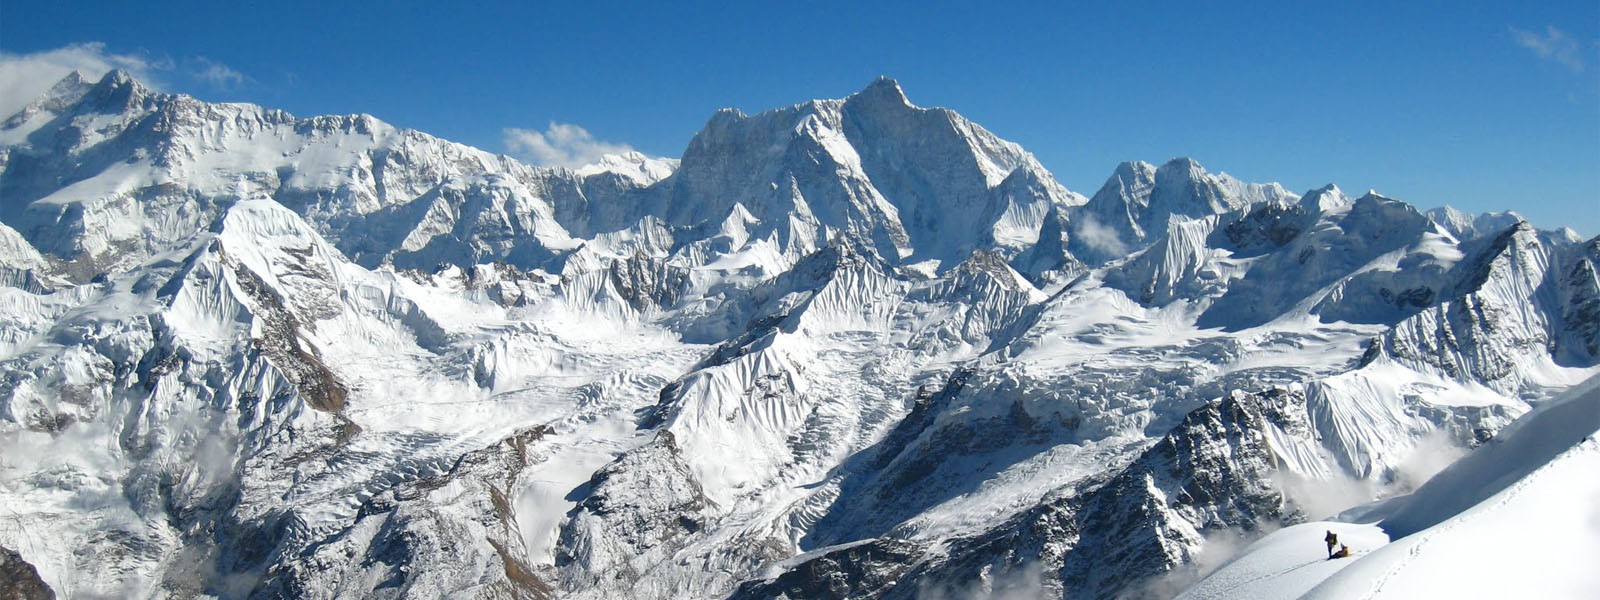 Jannu Himal Expedition Fixed Departure date